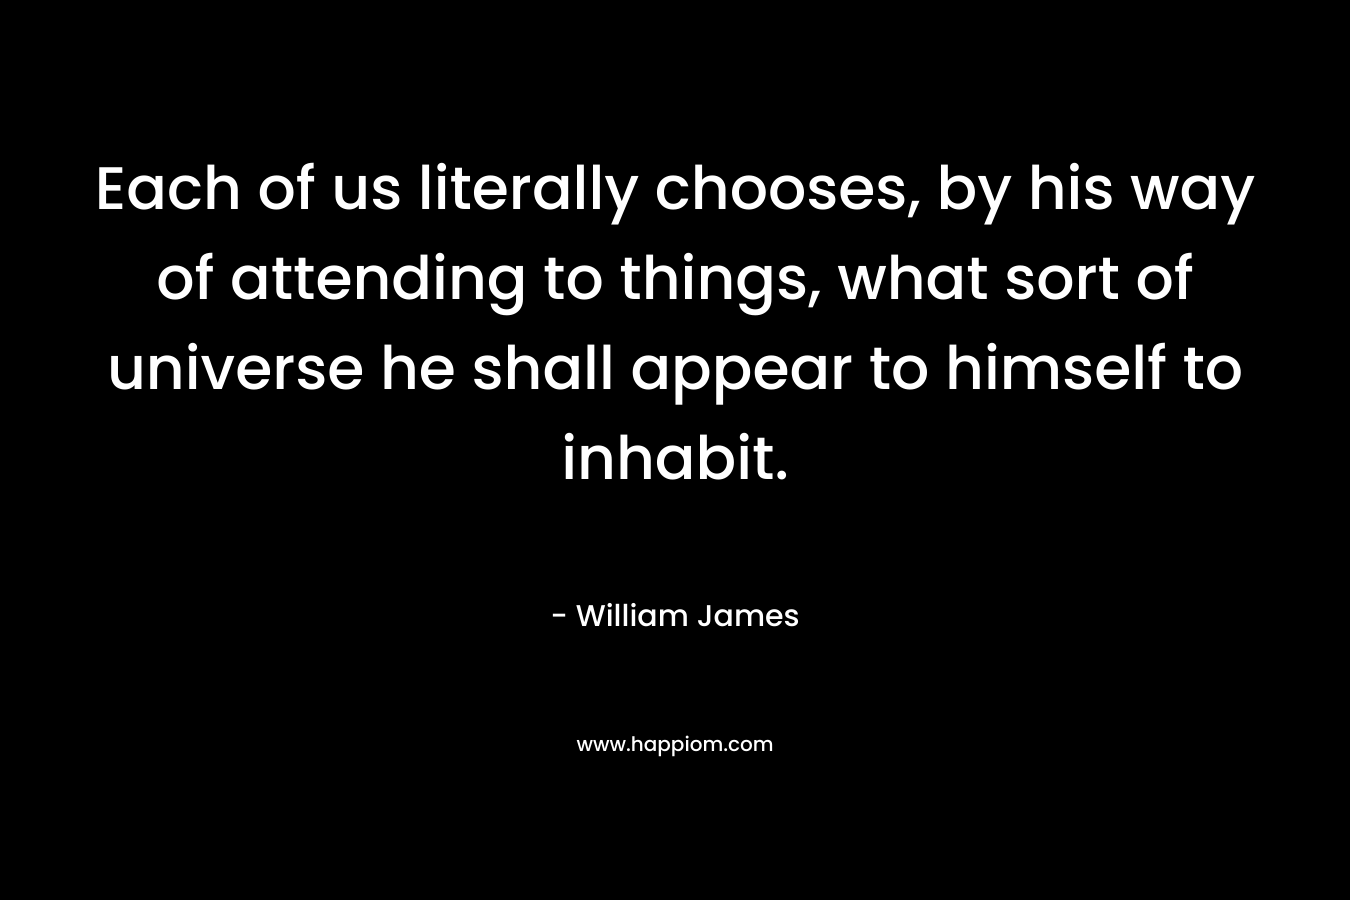 Each of us literally chooses, by his way of attending to things, what sort of universe he shall appear to himself to inhabit.